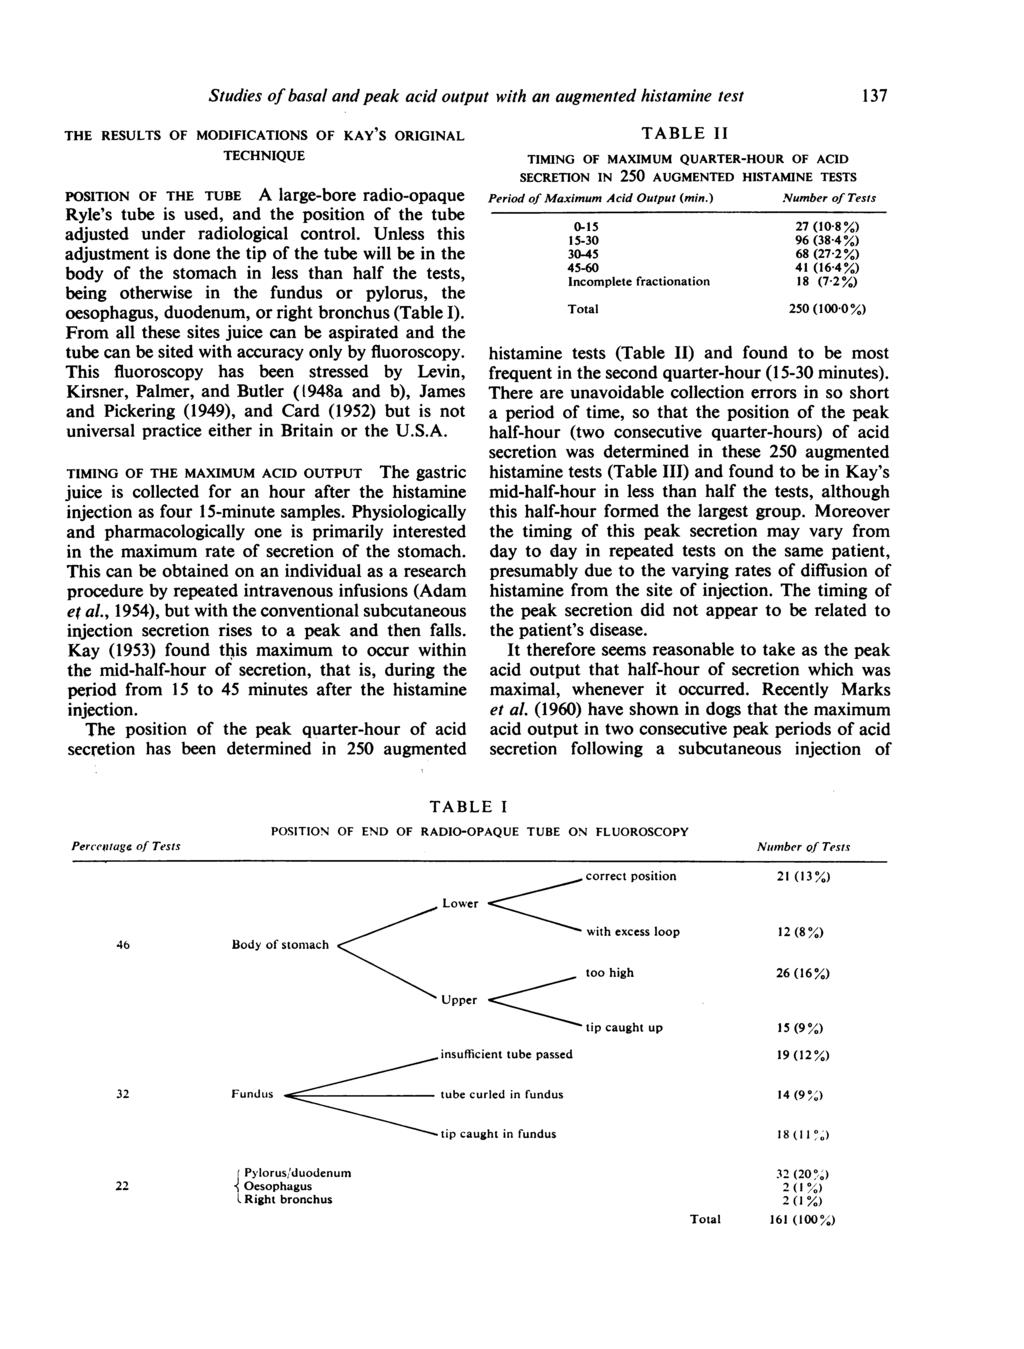 Studies of basal and peak acid output with an augmented histamine test THE RESULTS OF MODIFICATIONS OF KAY S ORIGINAL TECHNIQUE POSITION OF THE TUBE A large-bore radio-opaque Ryle's tube is used, and